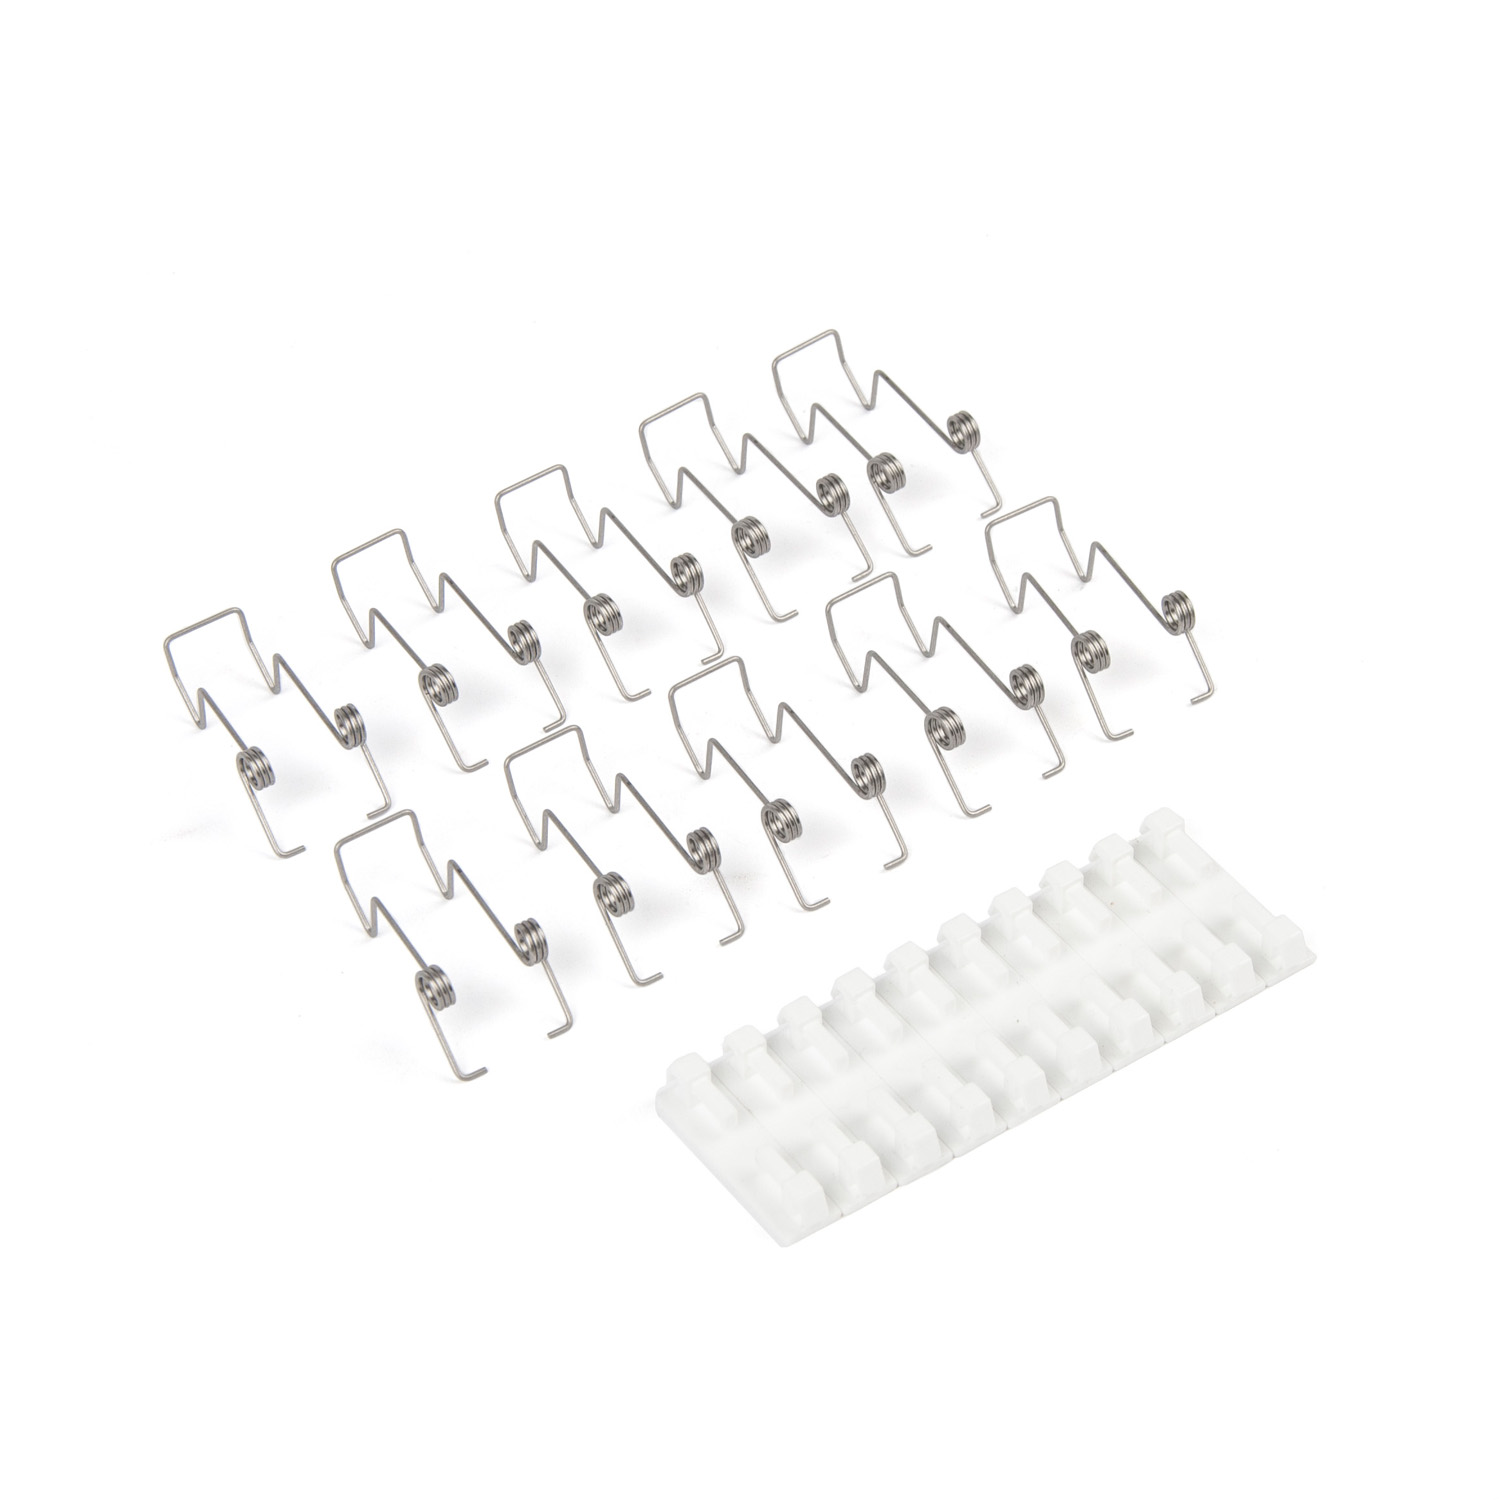 9840083300 diffuser clamp with holder, for type 1600, 10pcs